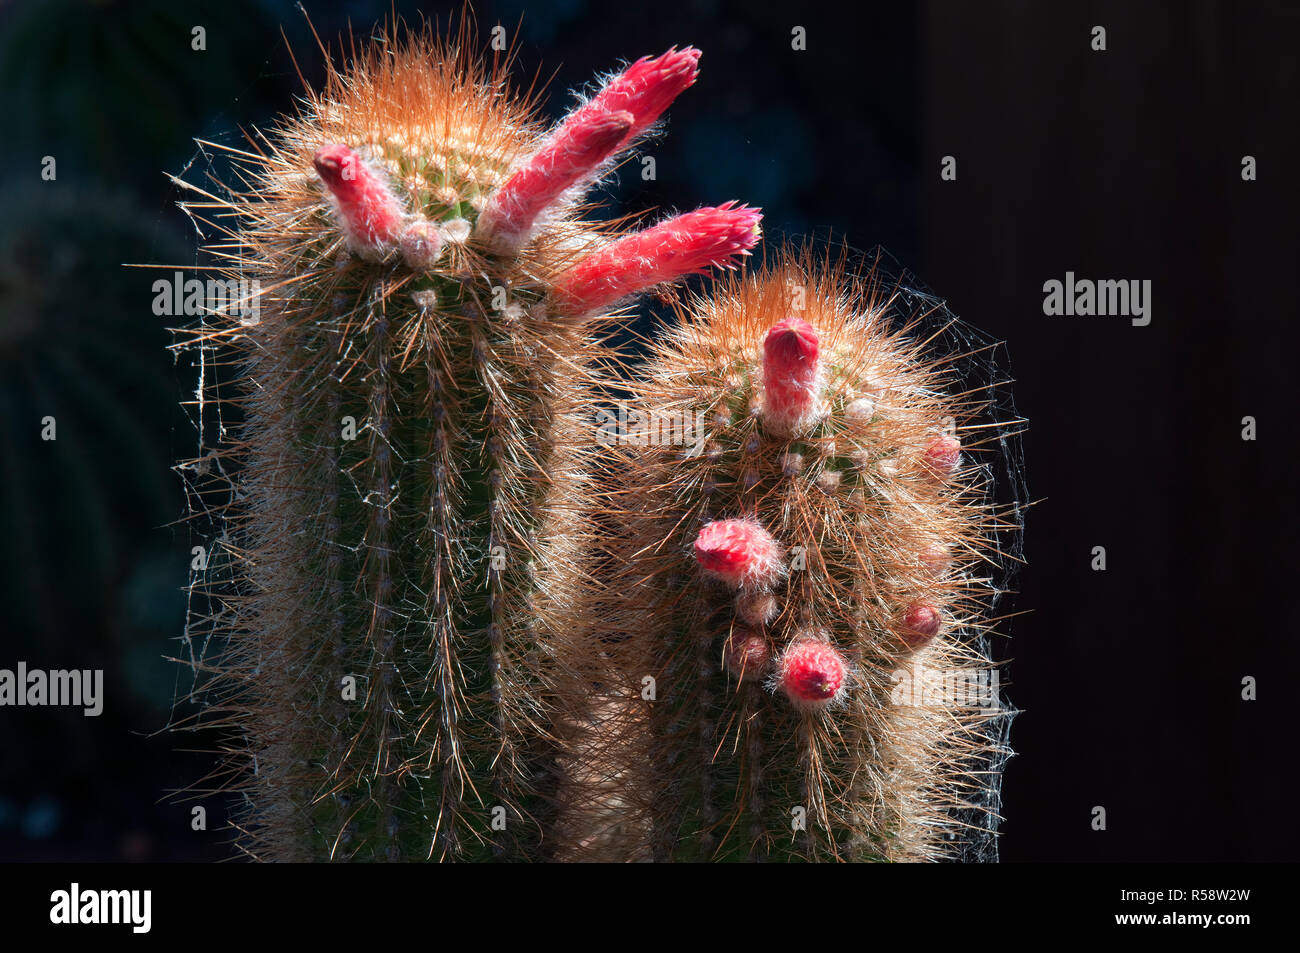 Sydney Australia, Stems of torch cactus with red flowers Stock Photo